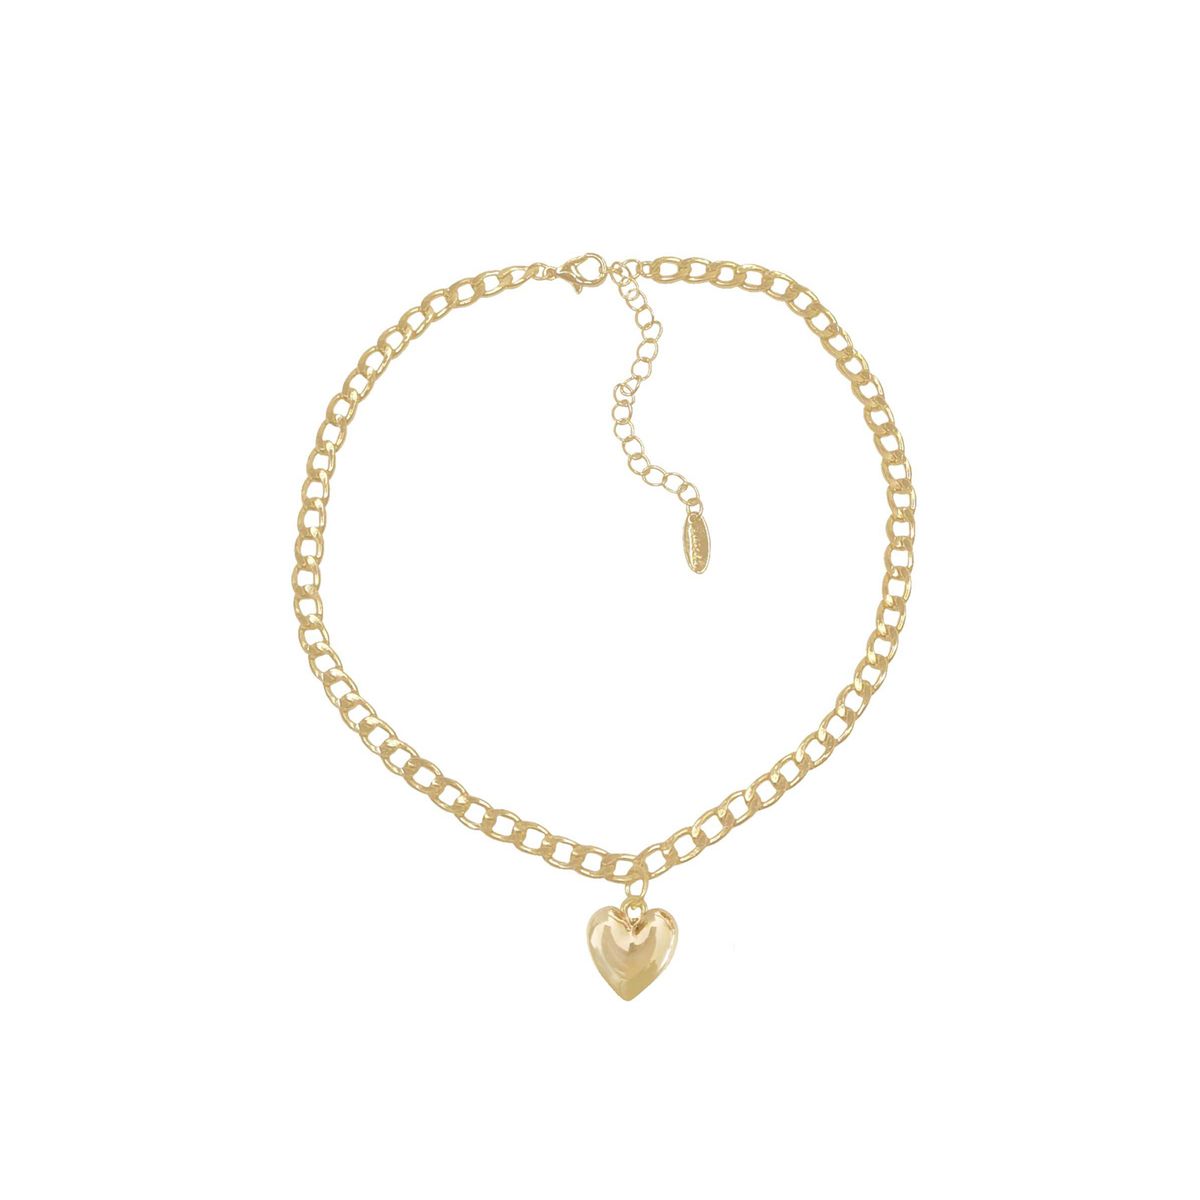 gold chain necklace with heart pendant